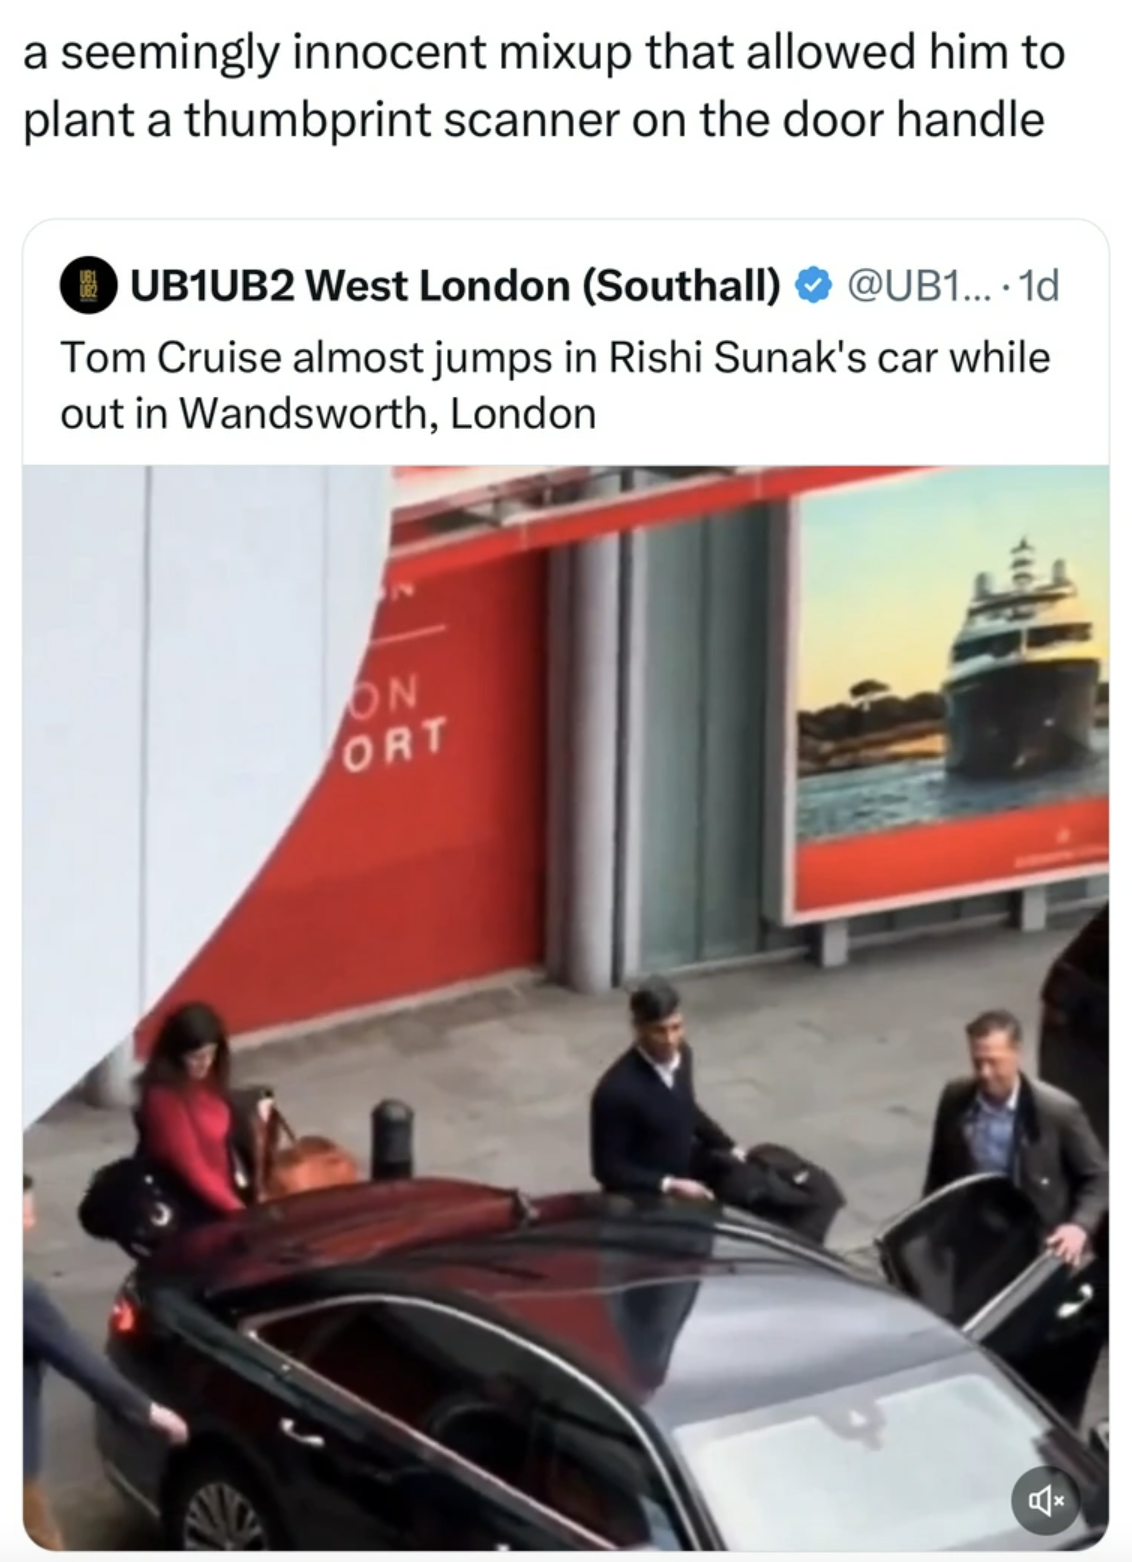 Rishi Sunak - a seemingly innocent mixup that allowed him to plant a thumbprint scanner on the door handle UB1UB2 West London Southall .... 1d Tom Cruise almost jumps in Rishi Sunak's car while out in Wandsworth, London On Ort